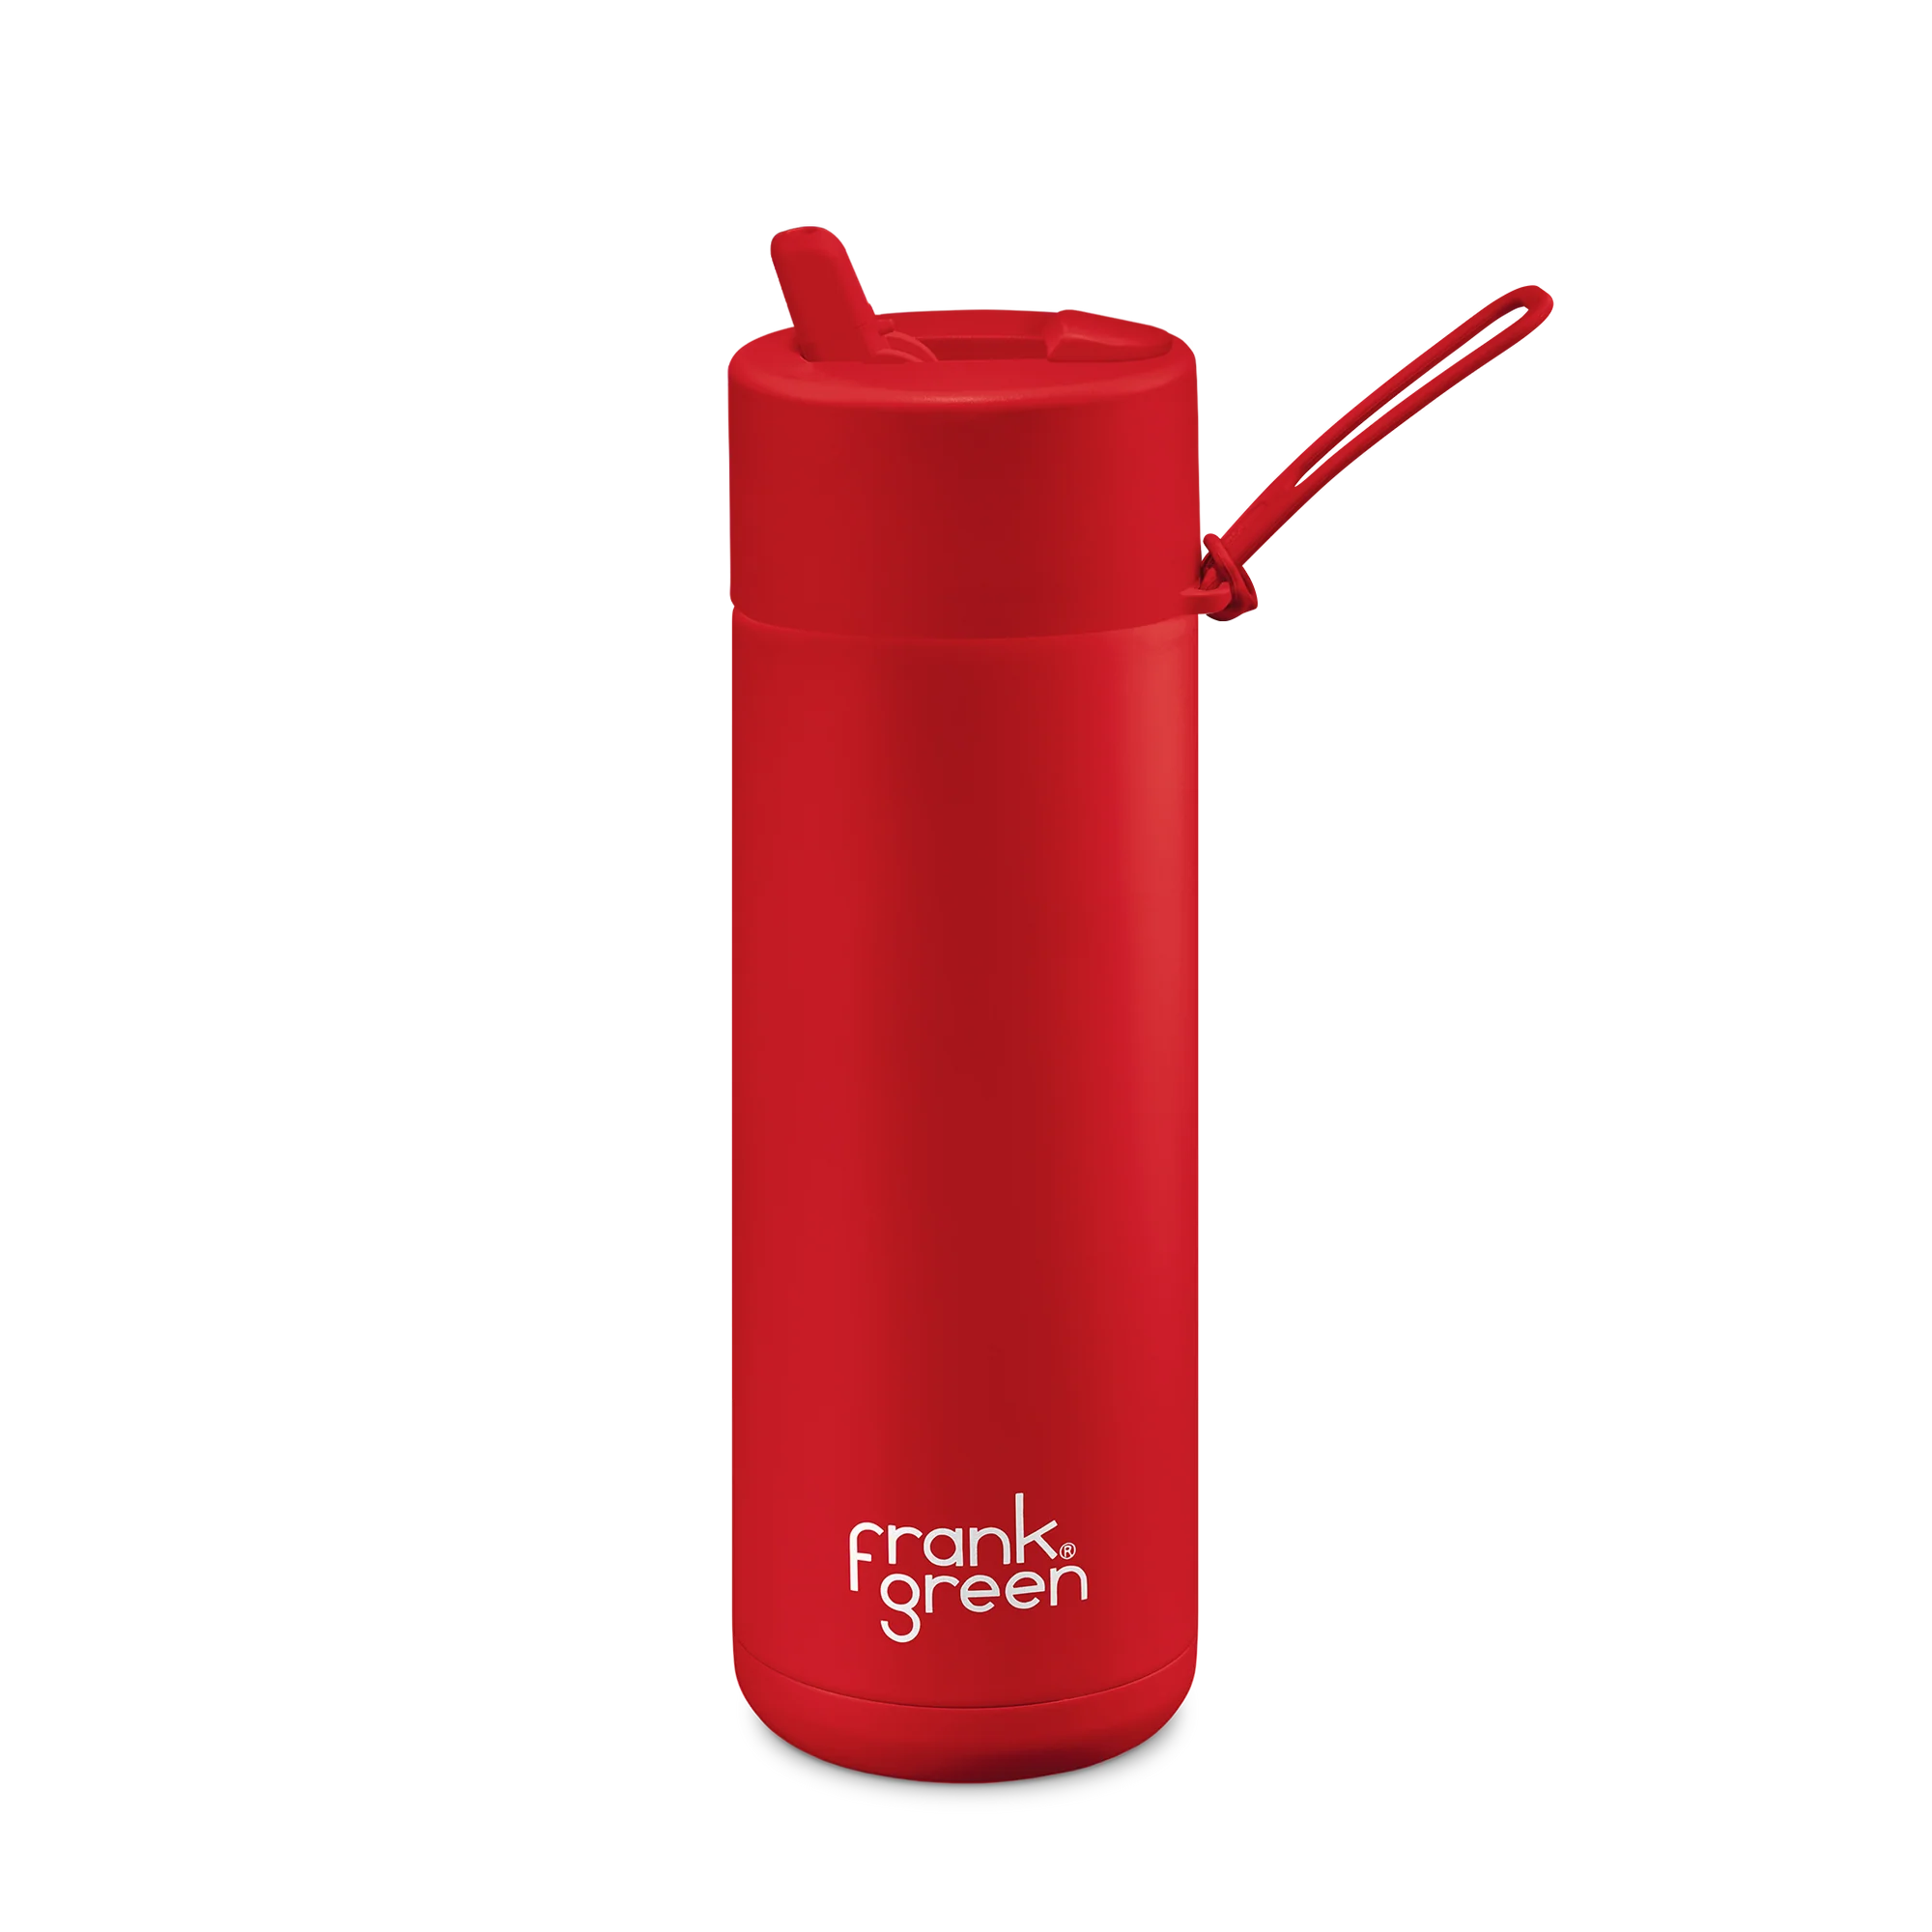 Frank Green Stainless Steel Ceramic Reusable Bottle Atomic Red With Straw 20oz/595ml